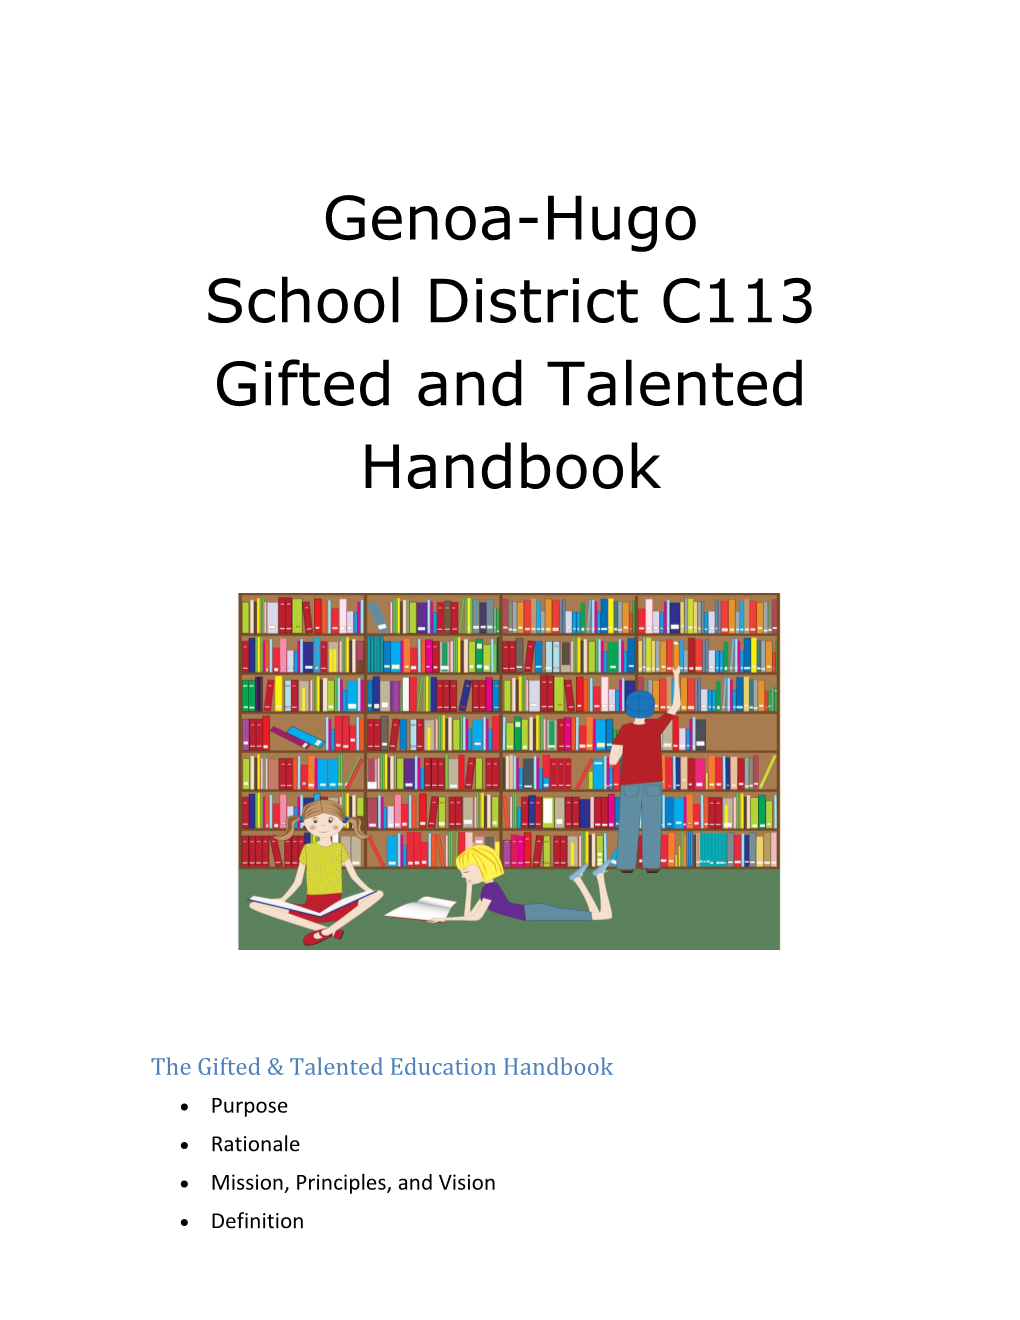 The Gifted & Talented Education Handbook